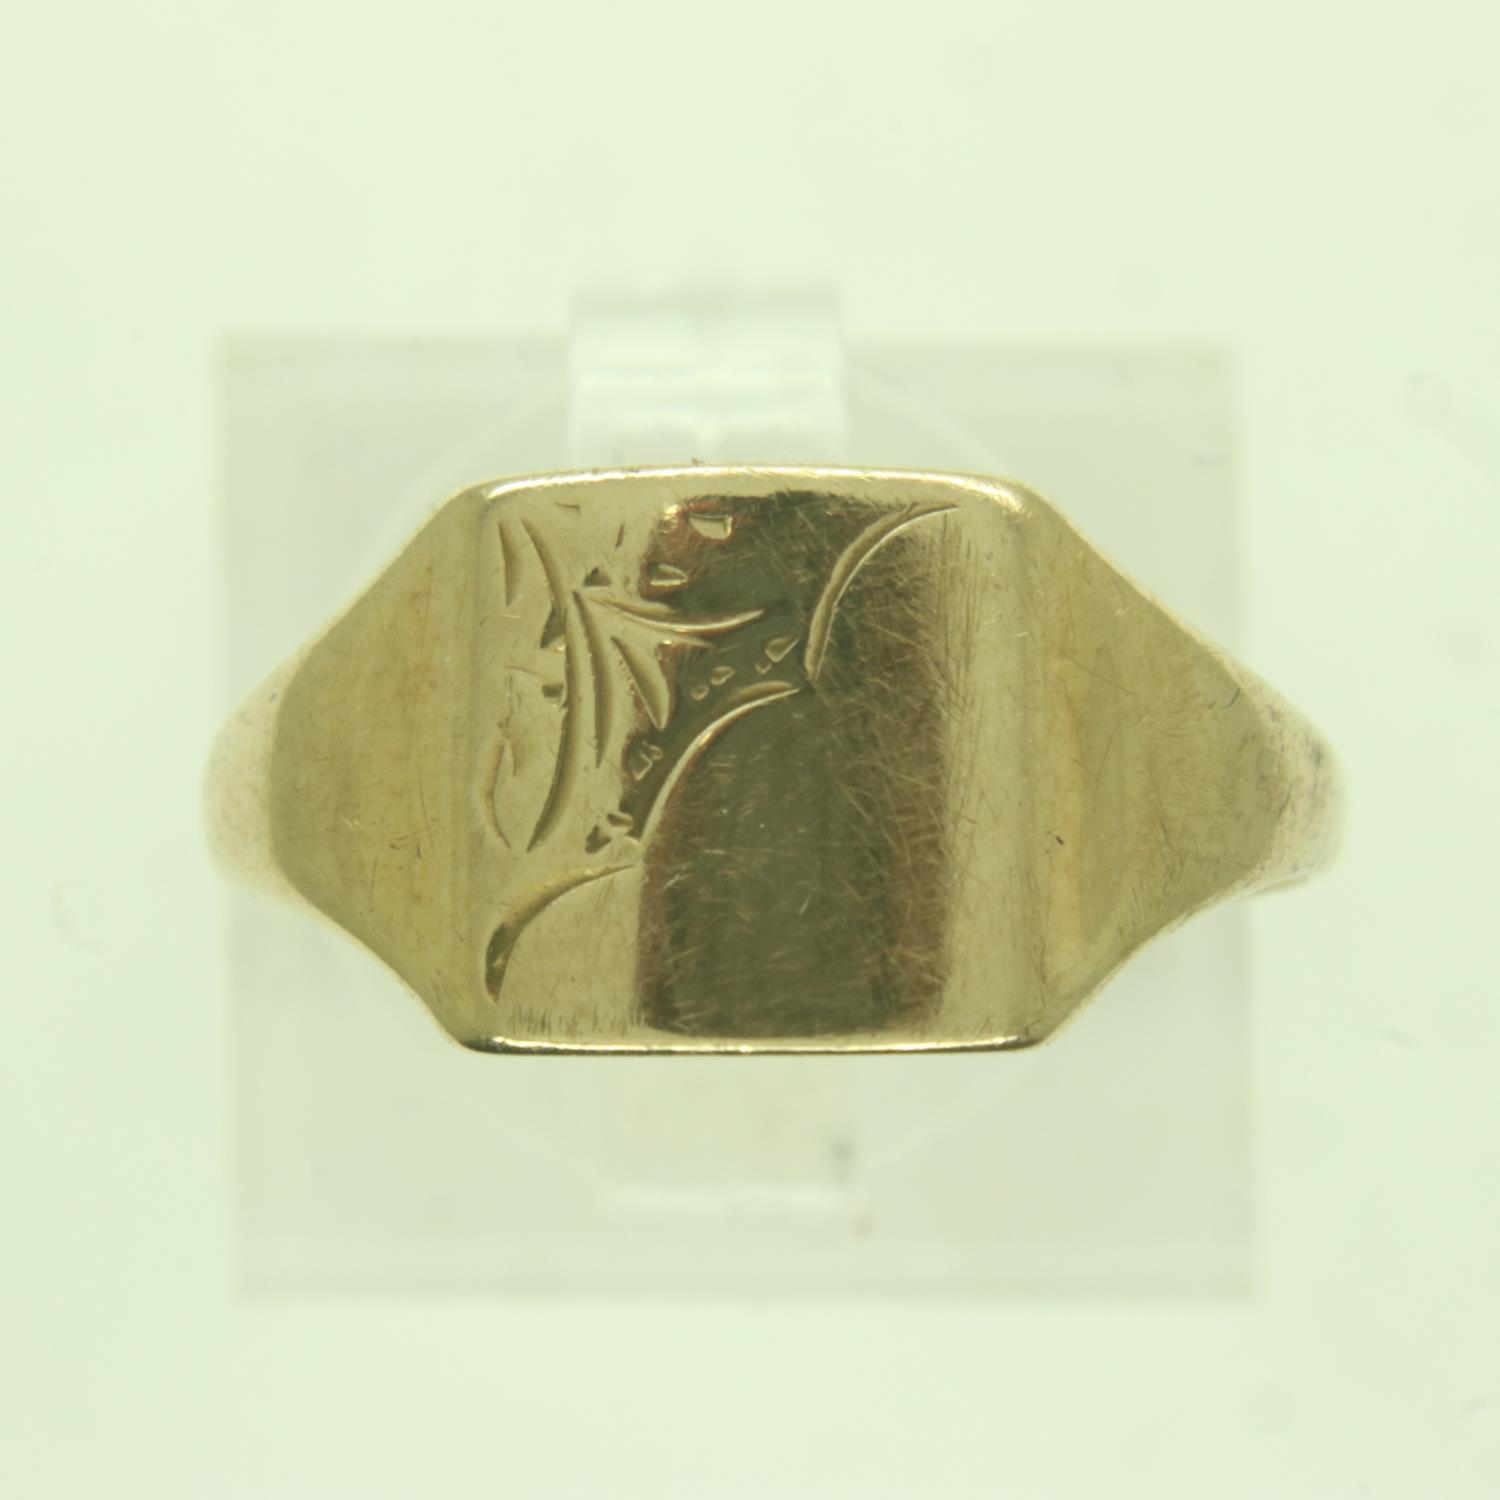 9ct gold signet ring, size M, misshapen, 1.8g. UK P&P Group 0 (£6+VAT for the first lot and £1+VAT